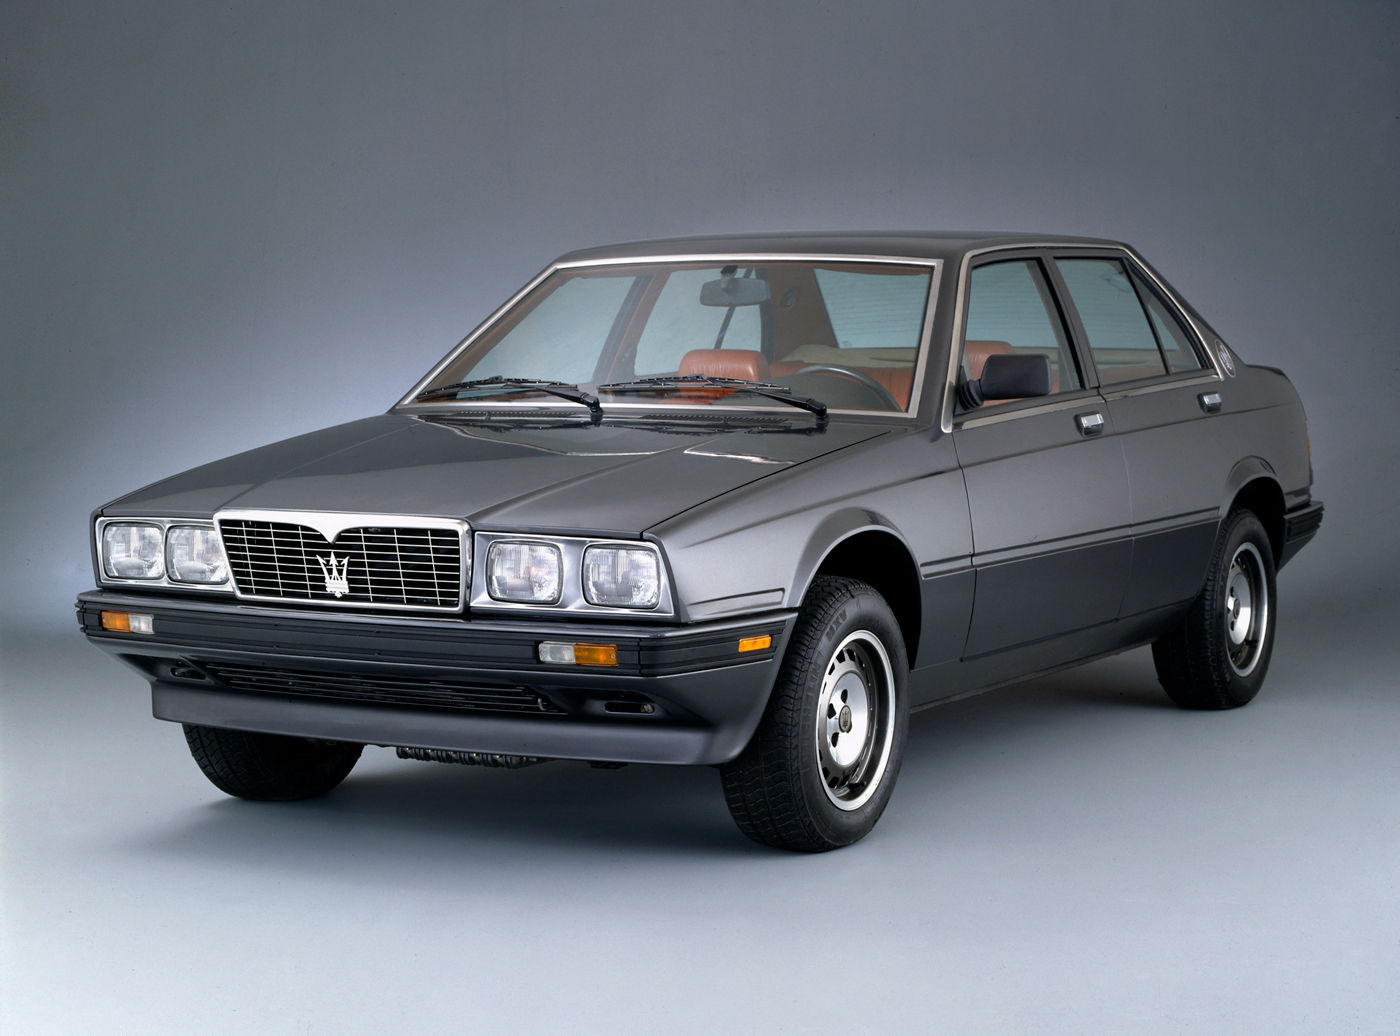 1985 Maserati 420 - exterior view of the classic model in gray